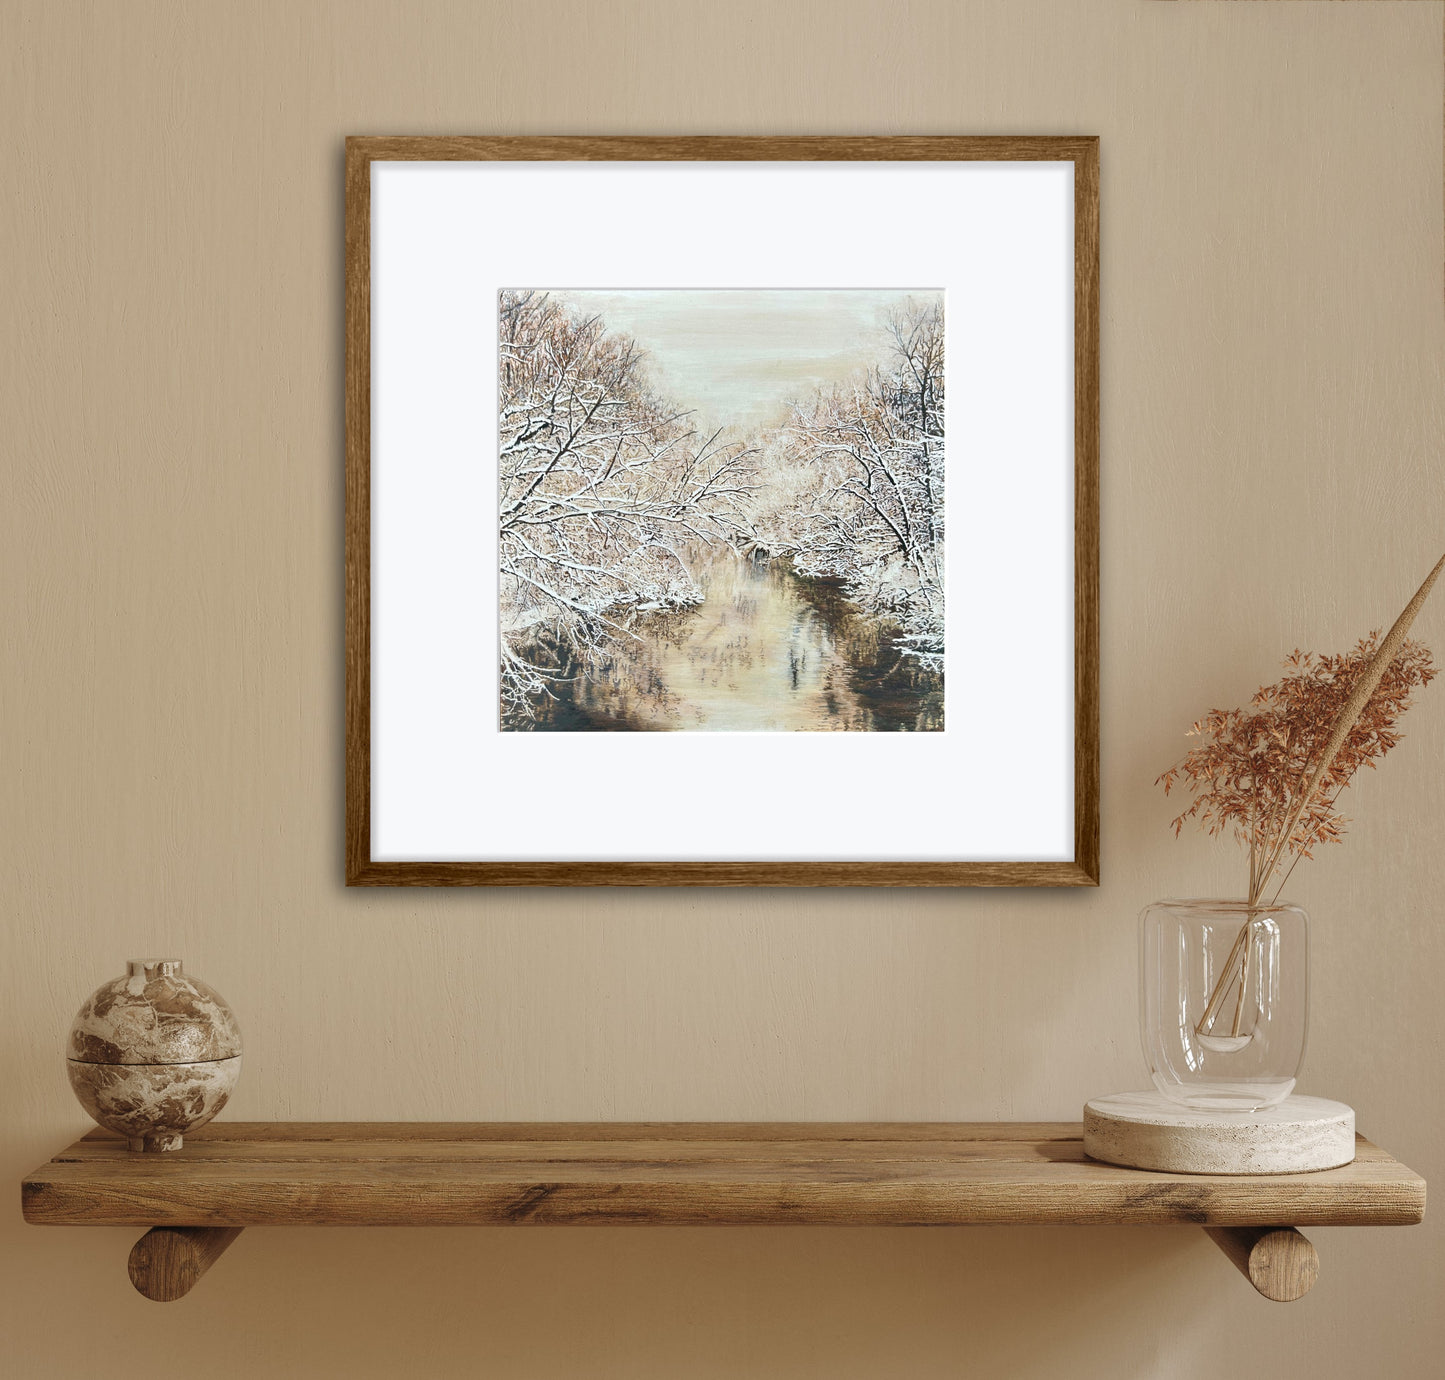 Print - "Straight River" Giclee Fine Art Print on Cardstock -Open Edition Print